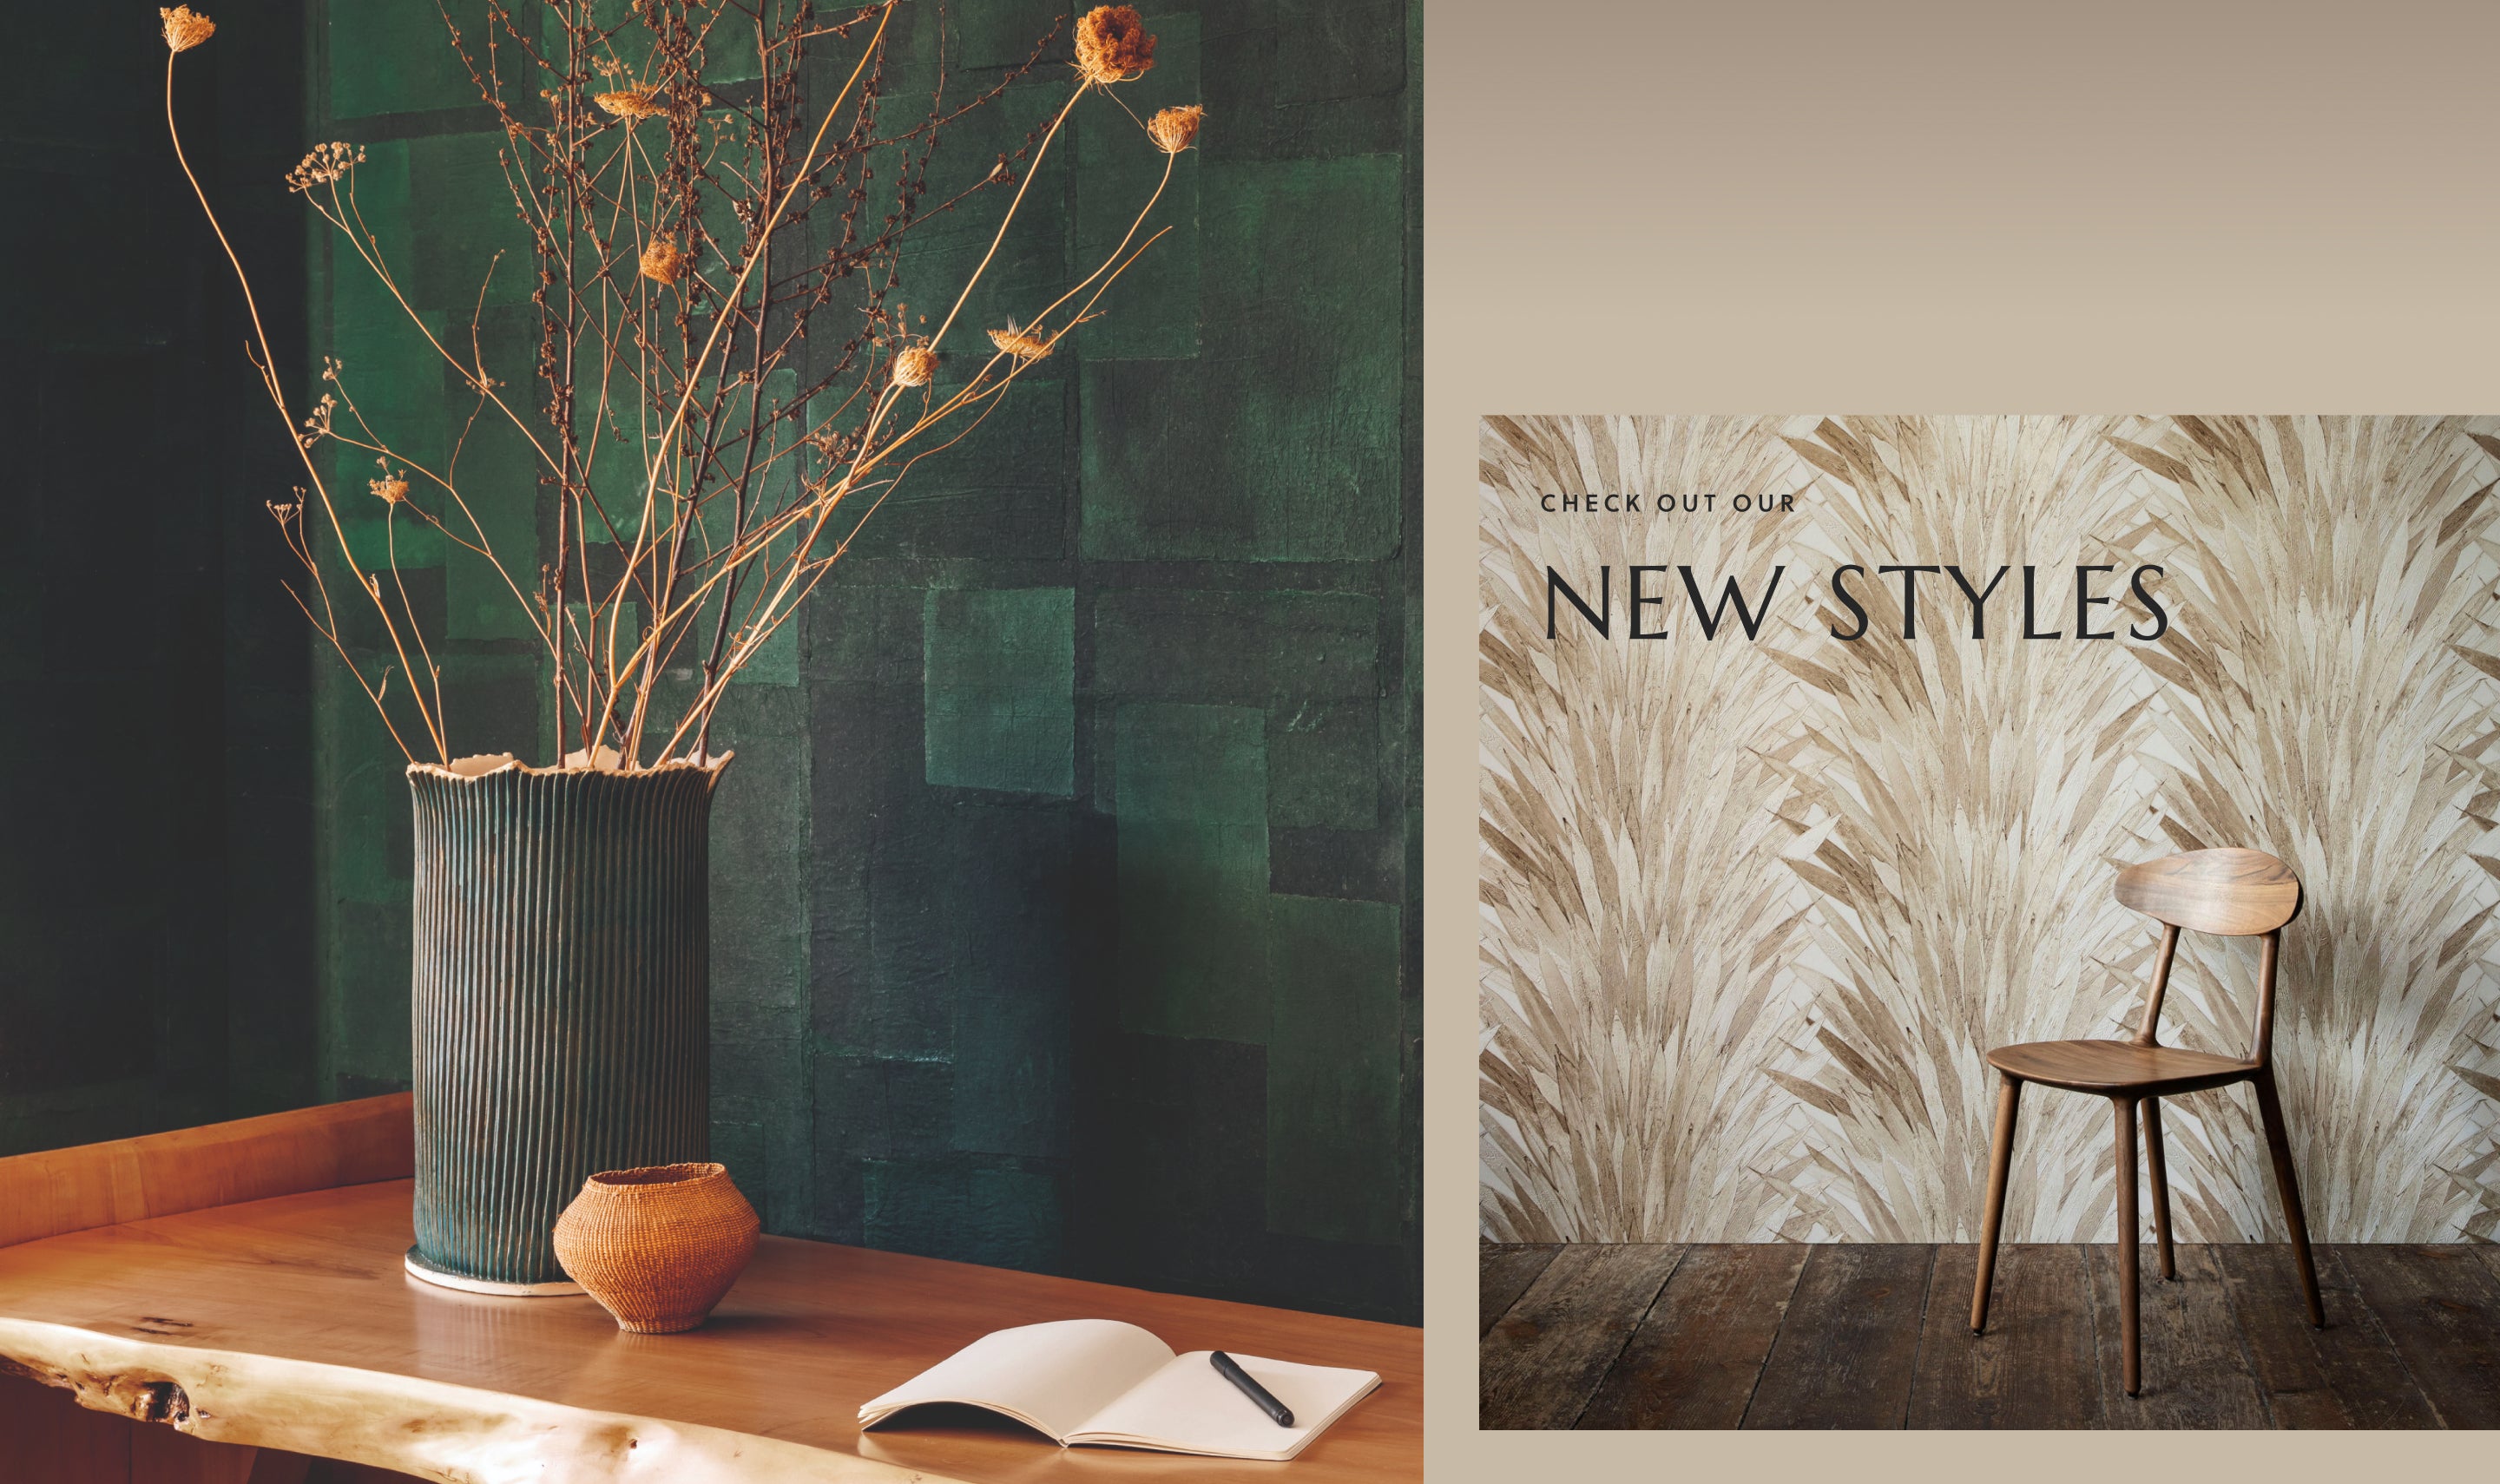 Captivating Banner: Dual room perspectives reveal a chic ambiance with green pattern wallpaper on one side and serene beige Palm Frond paper on the other.